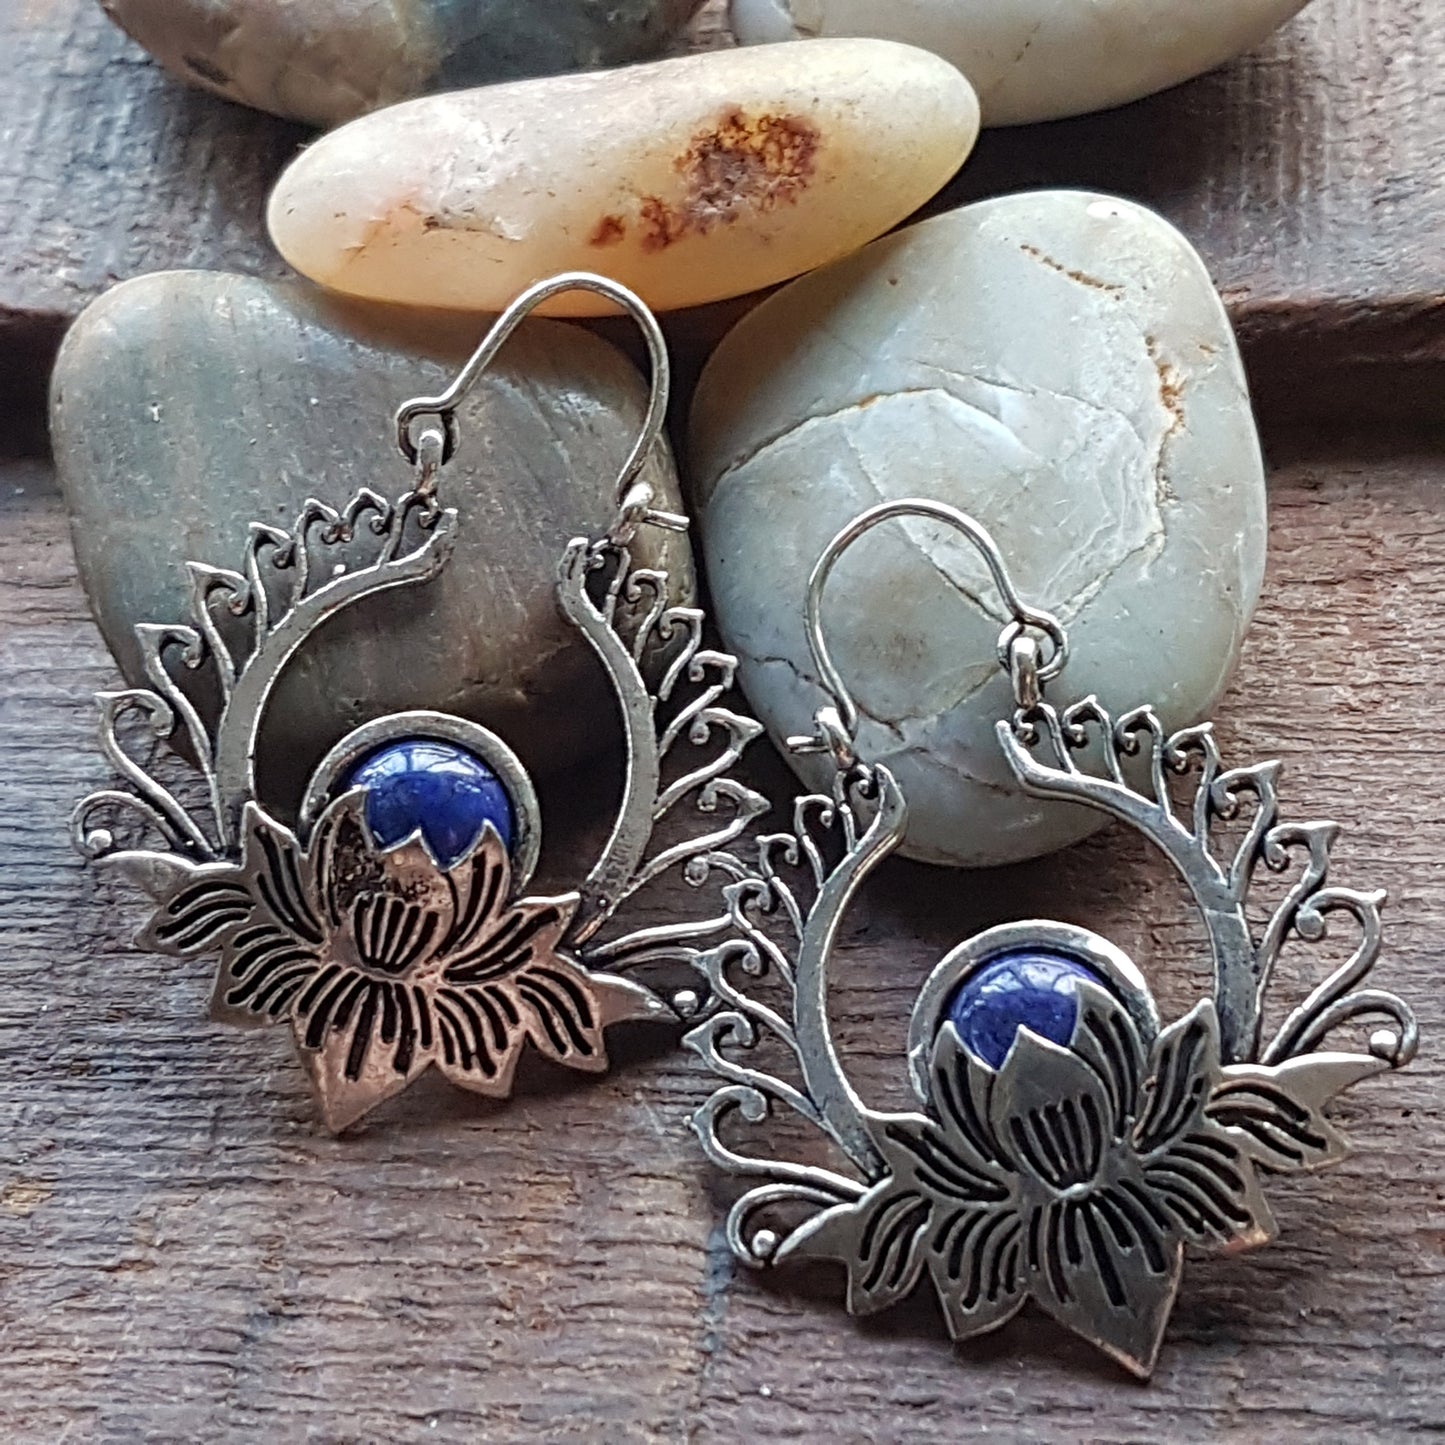 Fabulous silver lotus flower gemstone earrings. Esoteric and metaphysical theme jewelry. Large hanging earrings with semi precious stones.